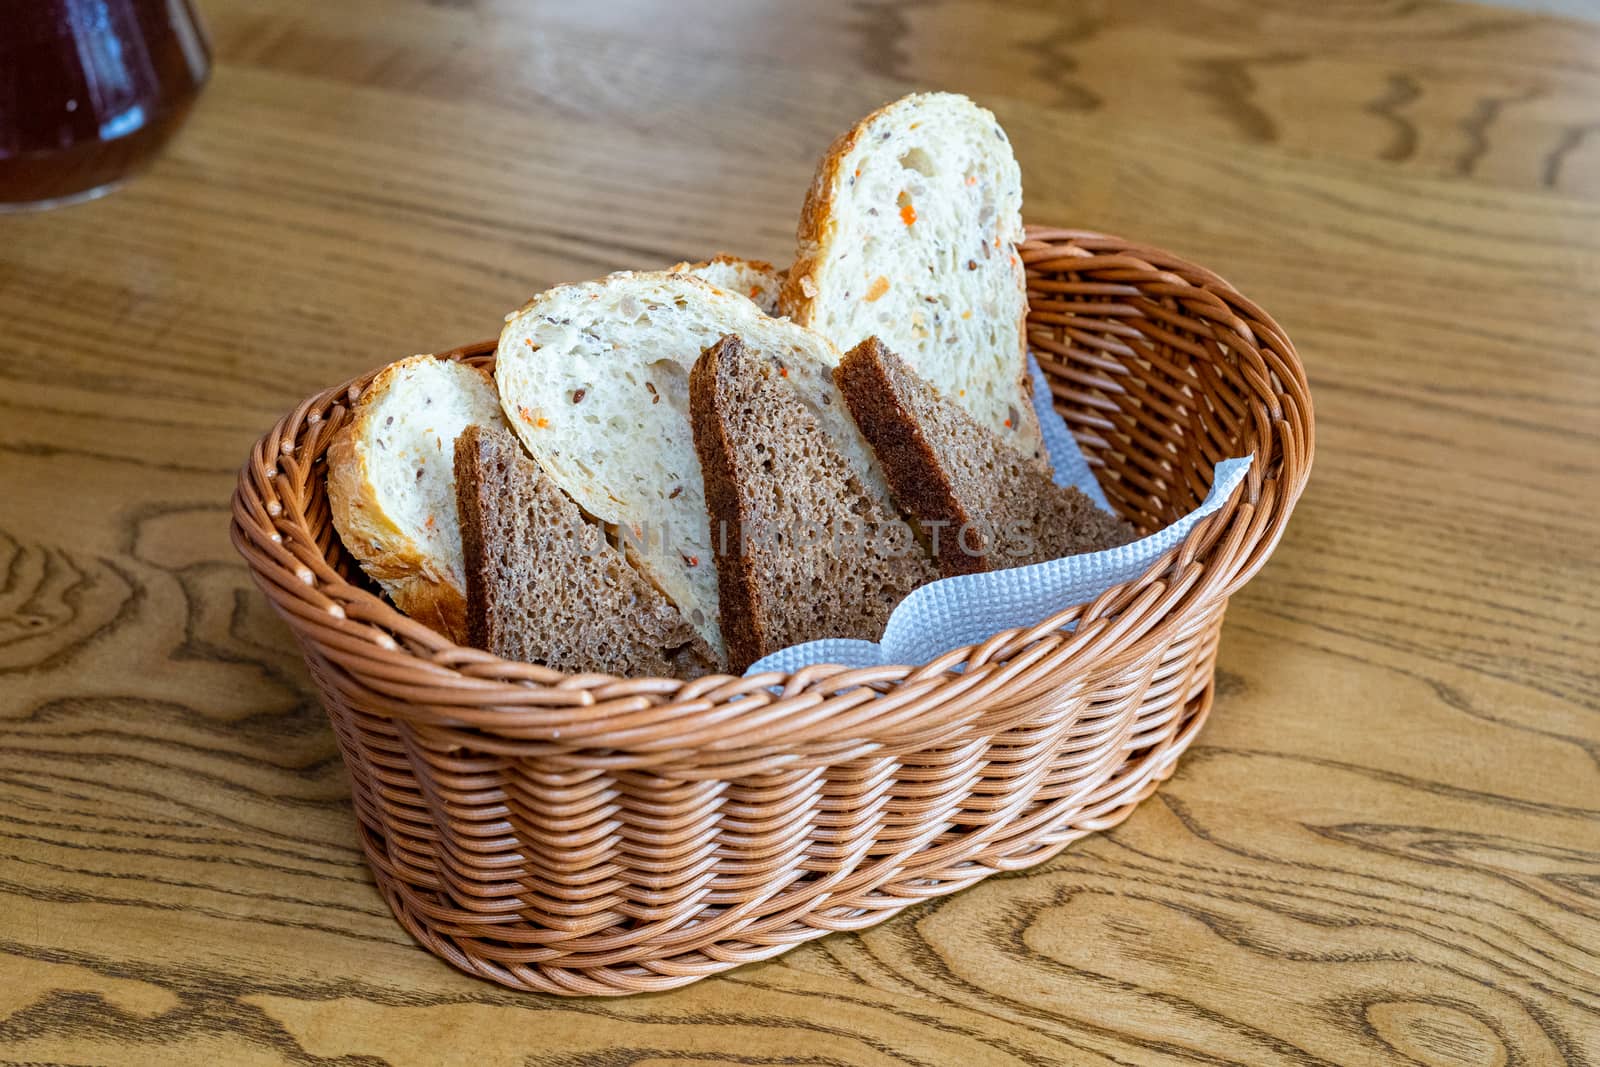 Black and white bread in a basket. Sliced bread in a basket. Pieces of bread are ready to eat